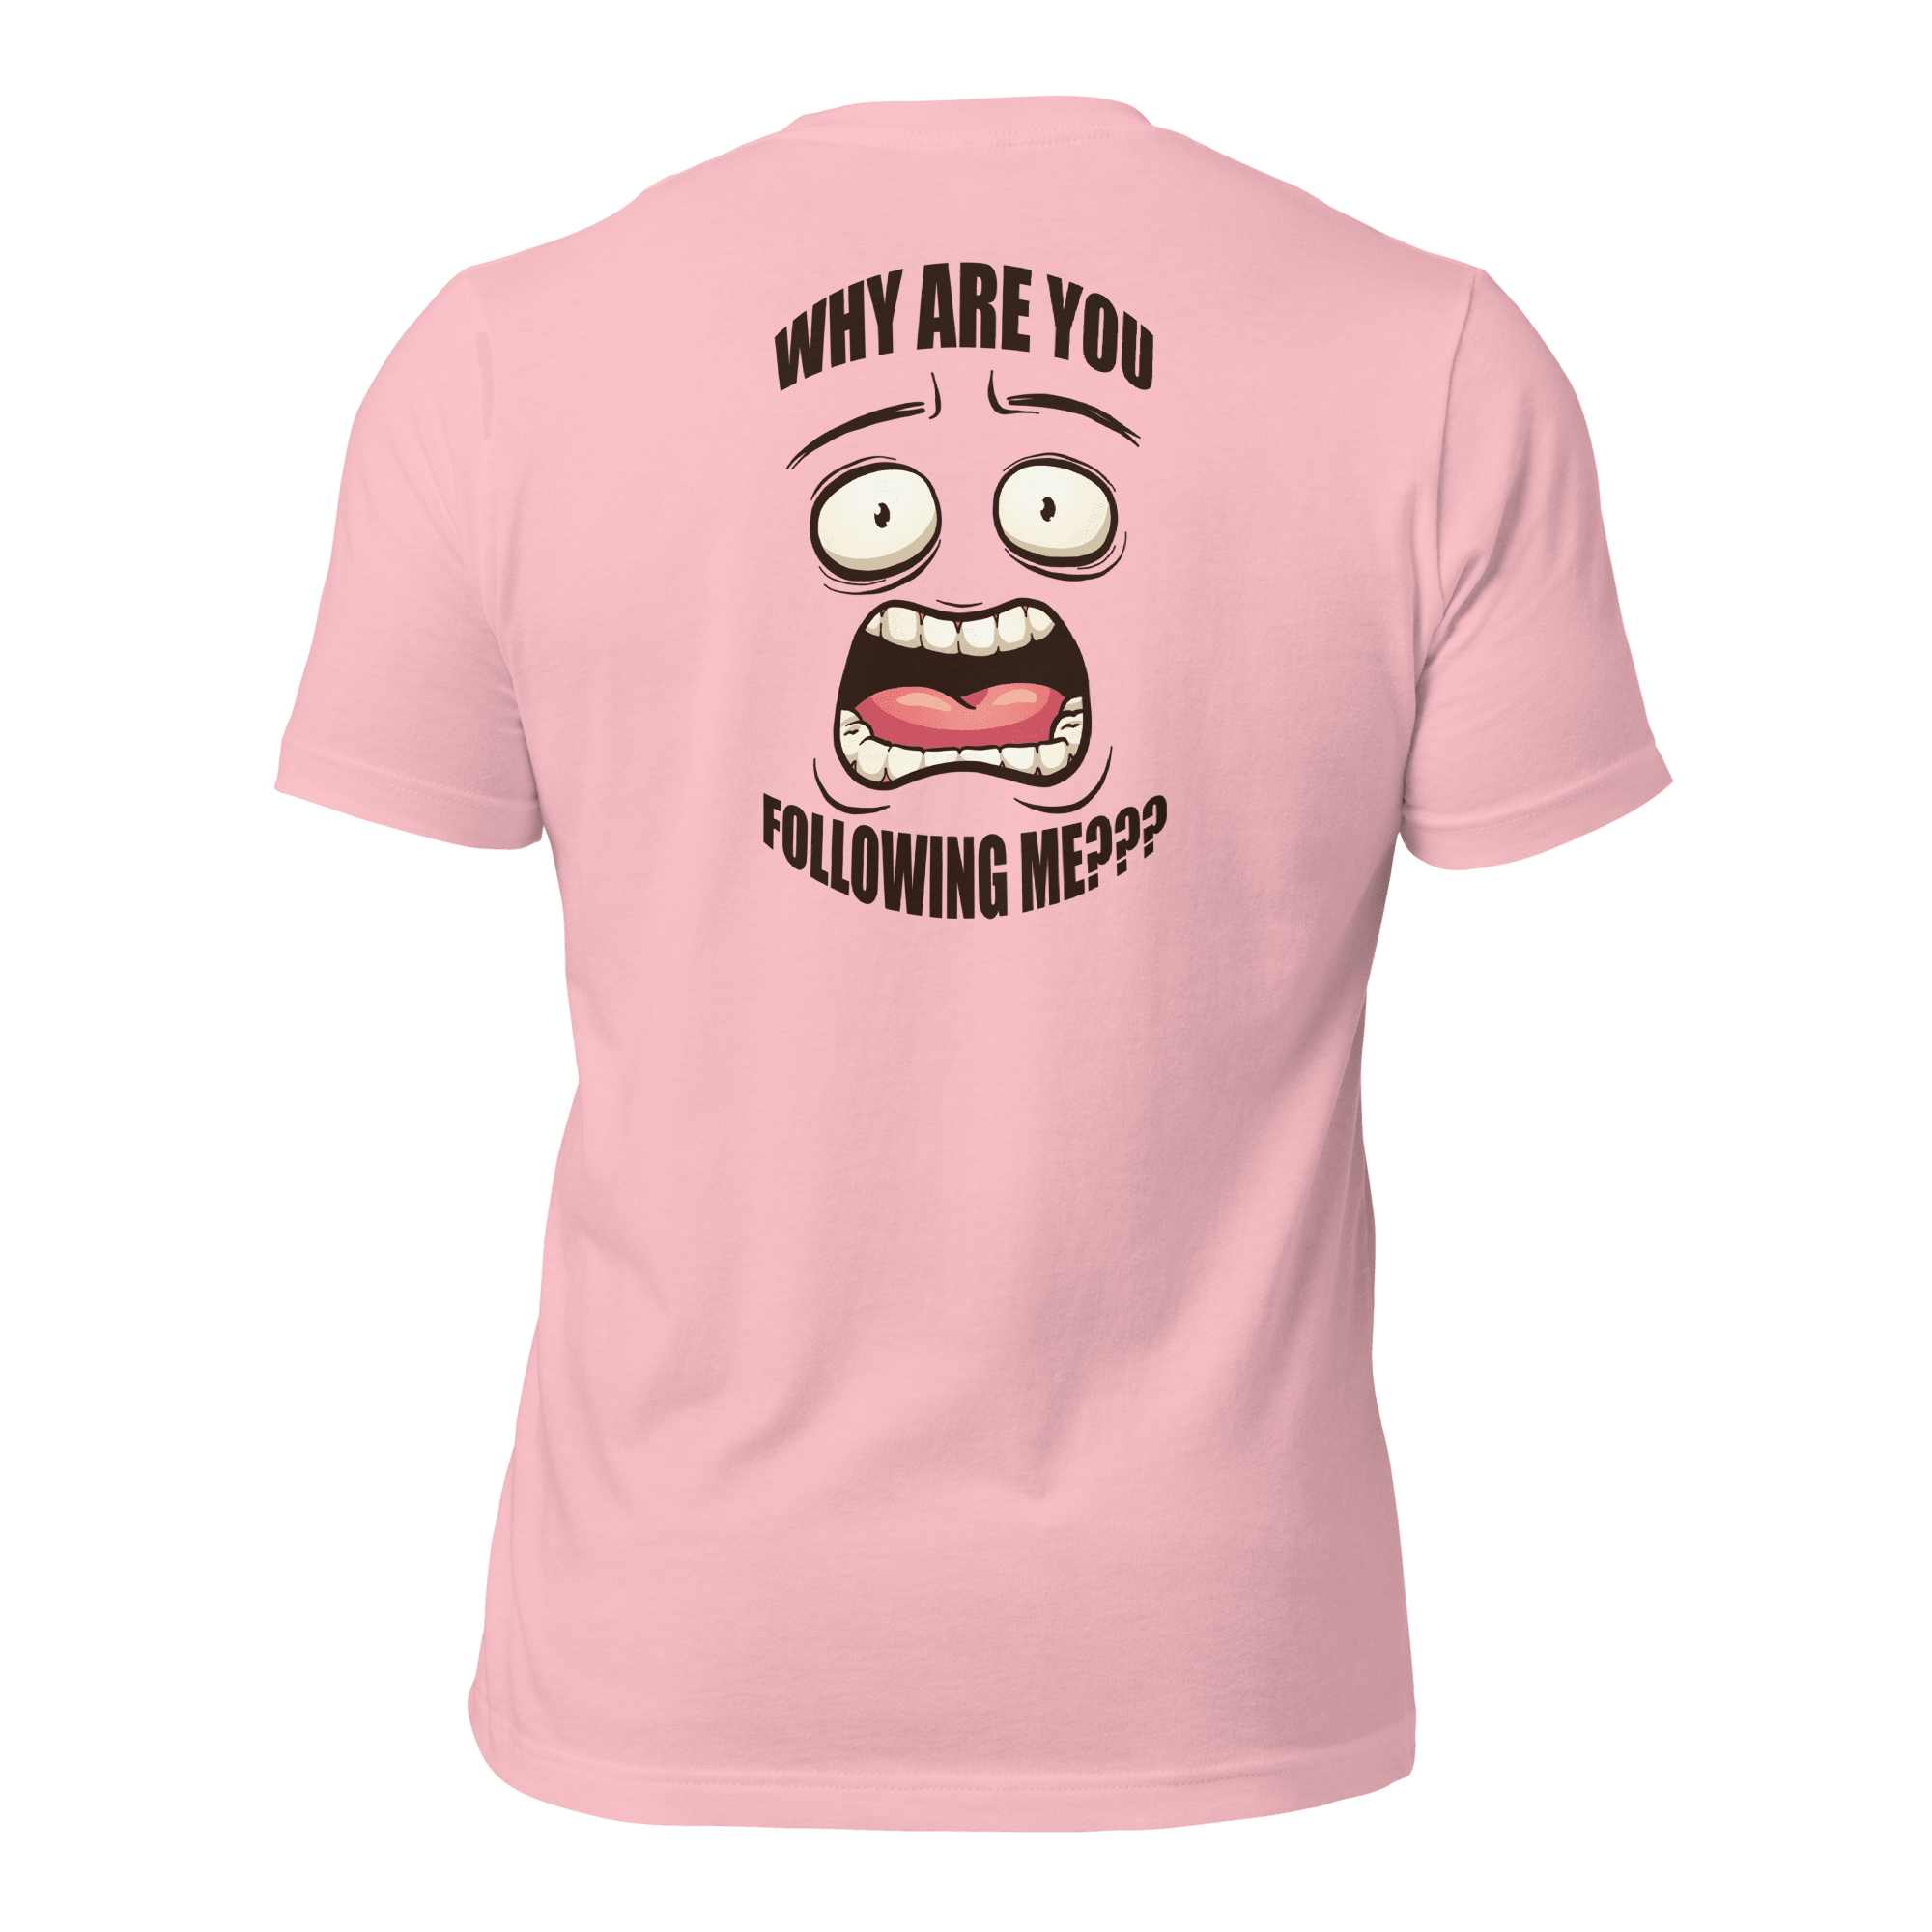 Why Are You Following Me? Unisex t-shirt